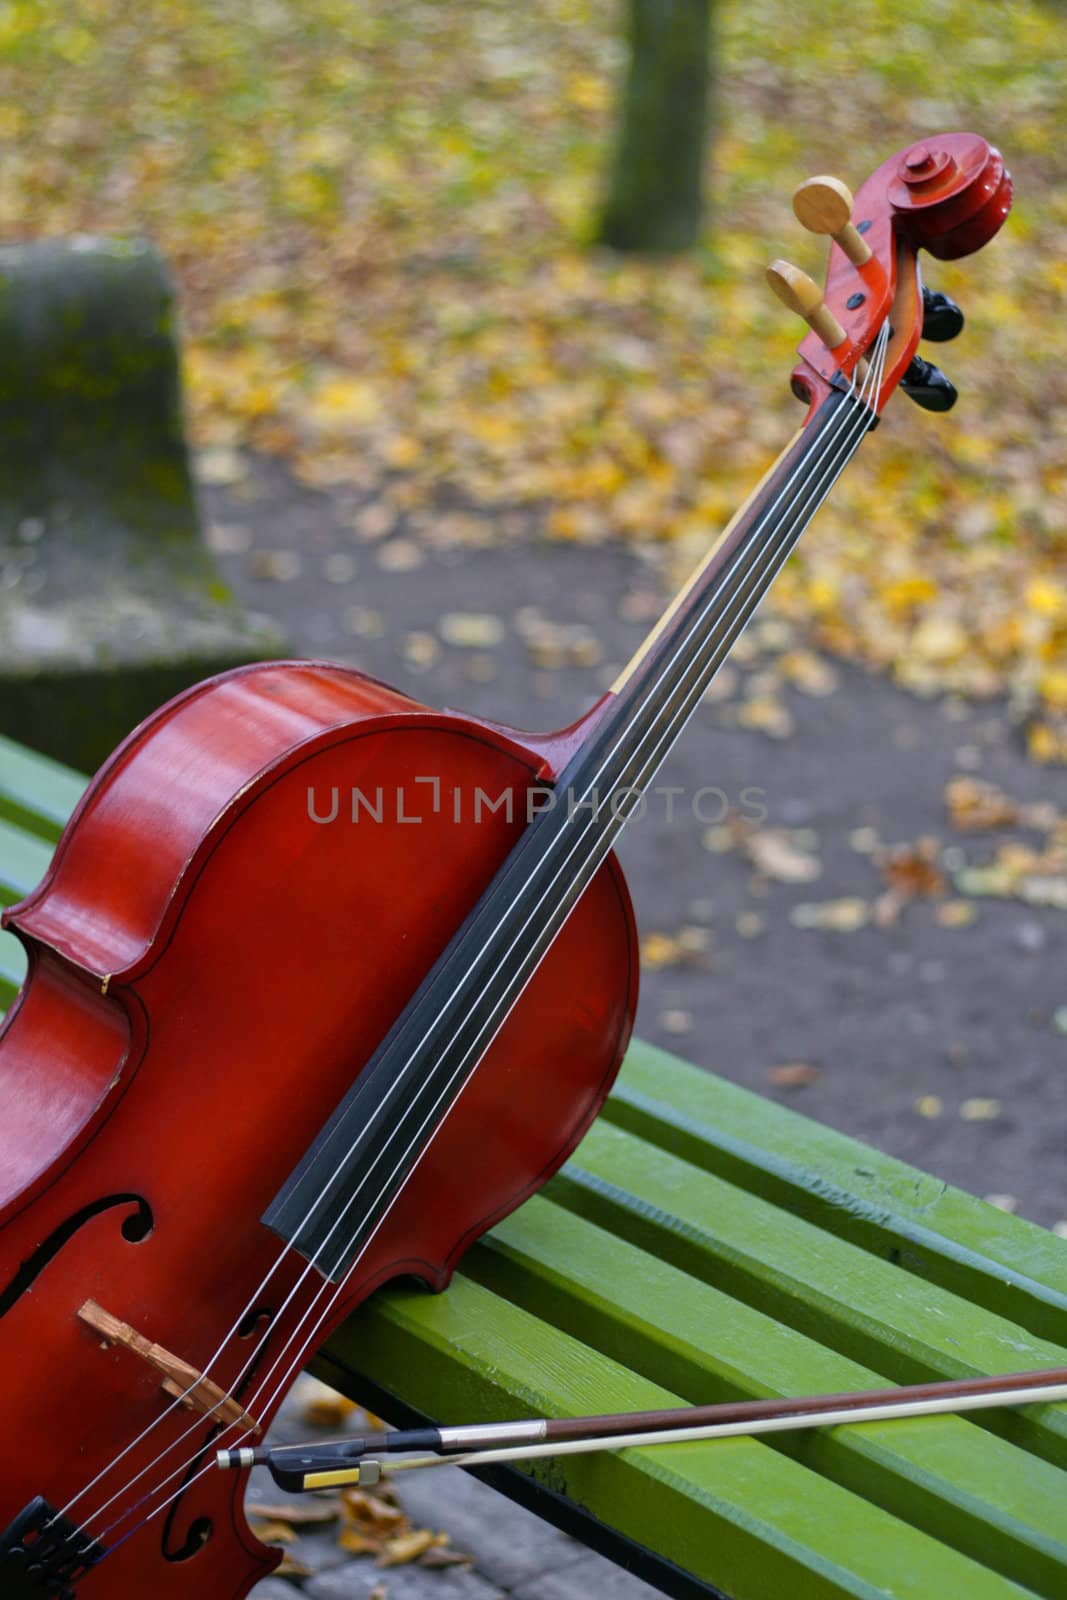 Violoncello on a bench in ����� in the autumn